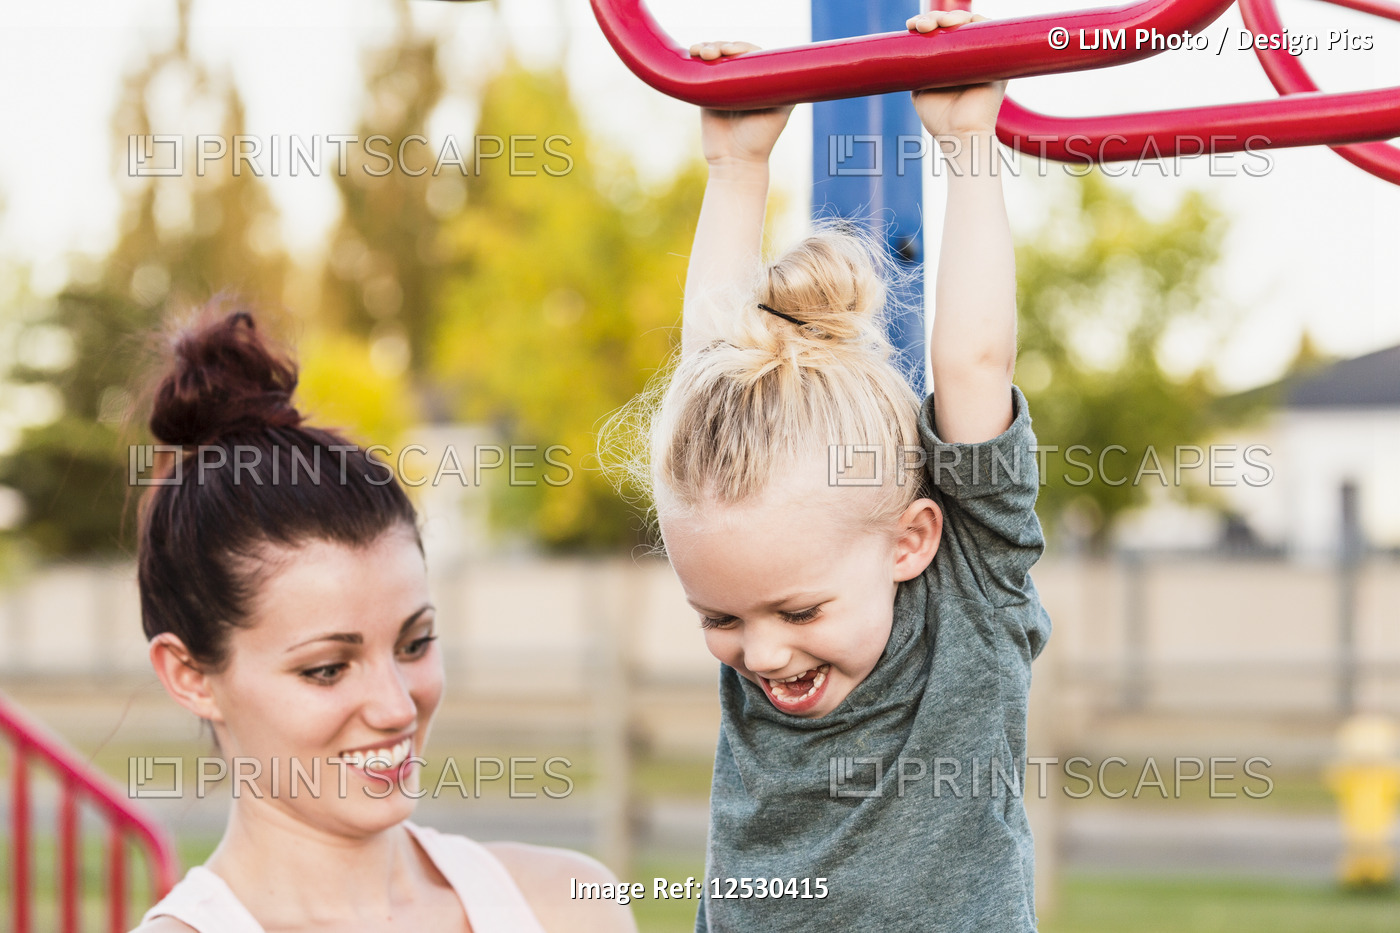 Young girl with blonde hair playing in in a playground on a warm fall day while ...